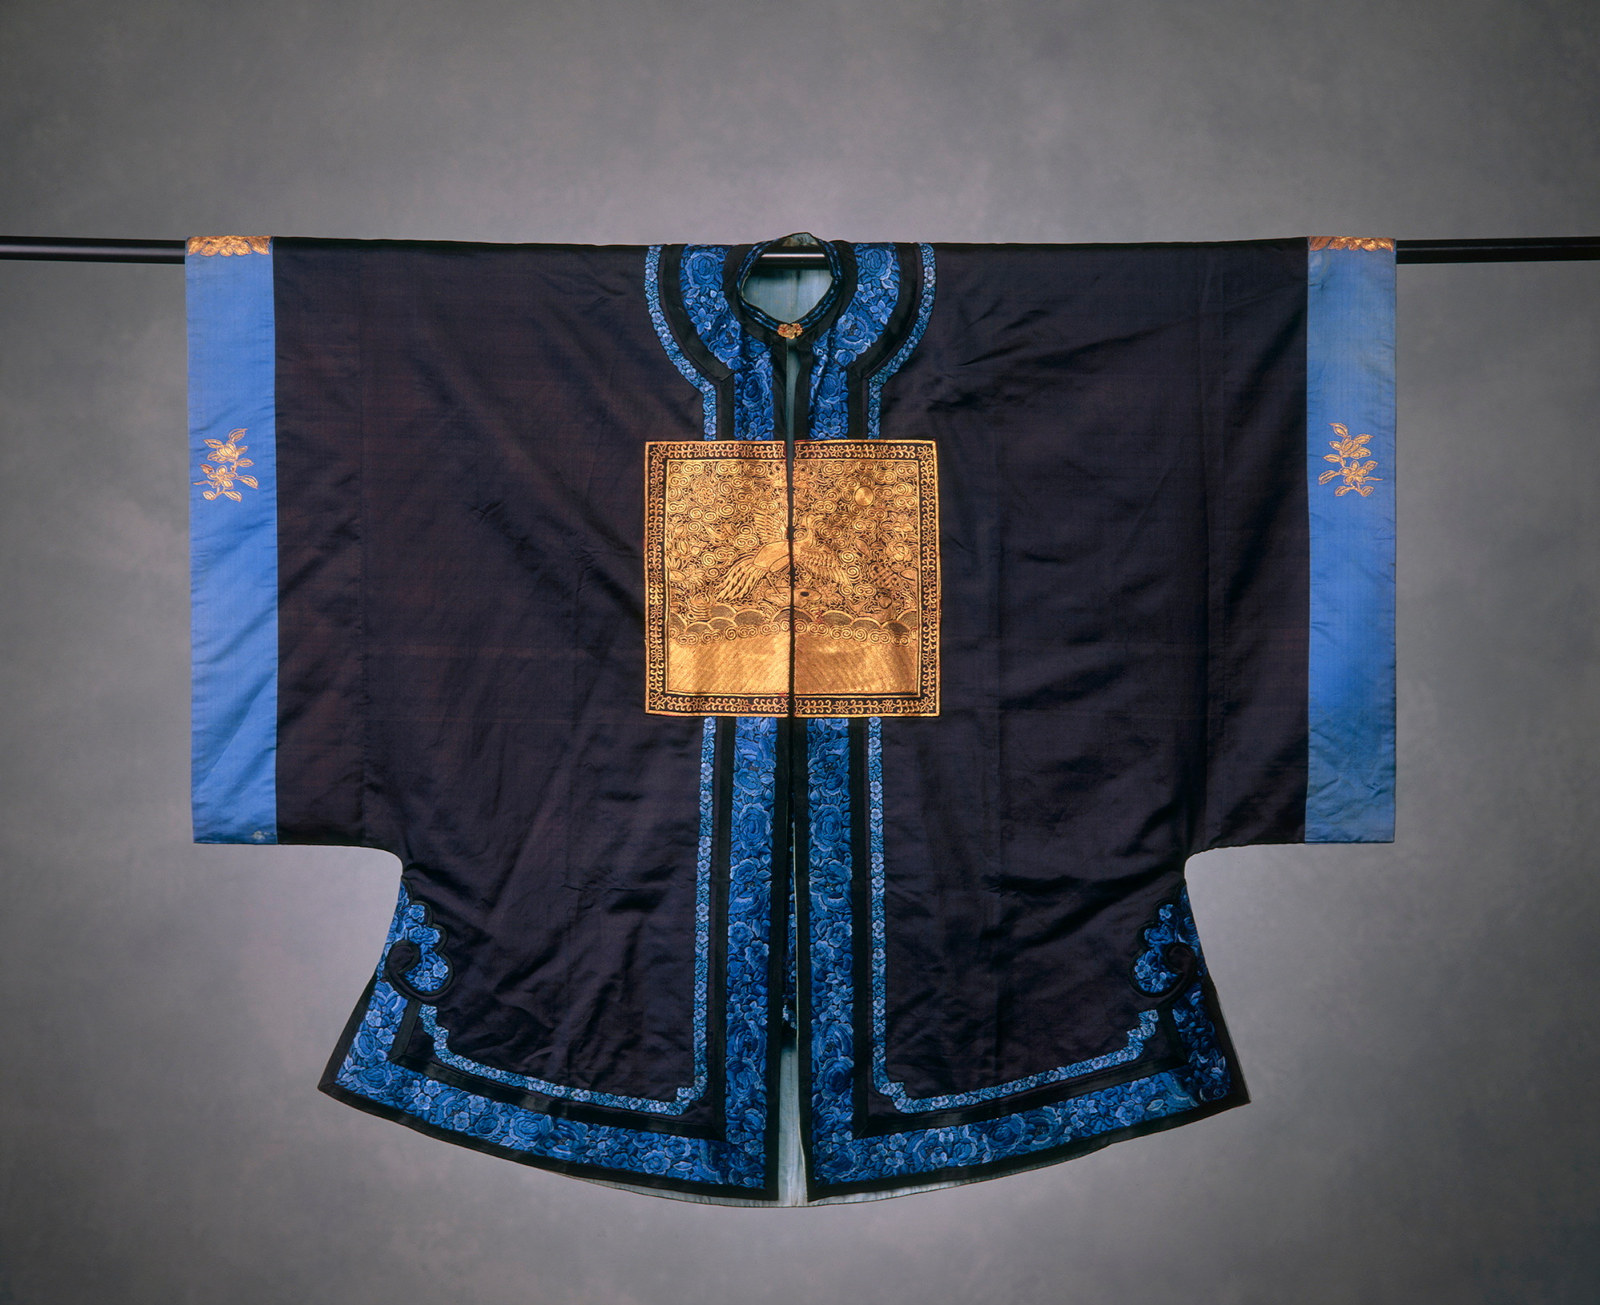 Navy coloured Chinese coat, trimmed with lighter blue bands, with golden emblems. The coat features a bold golden square panel in the centre of the chest.